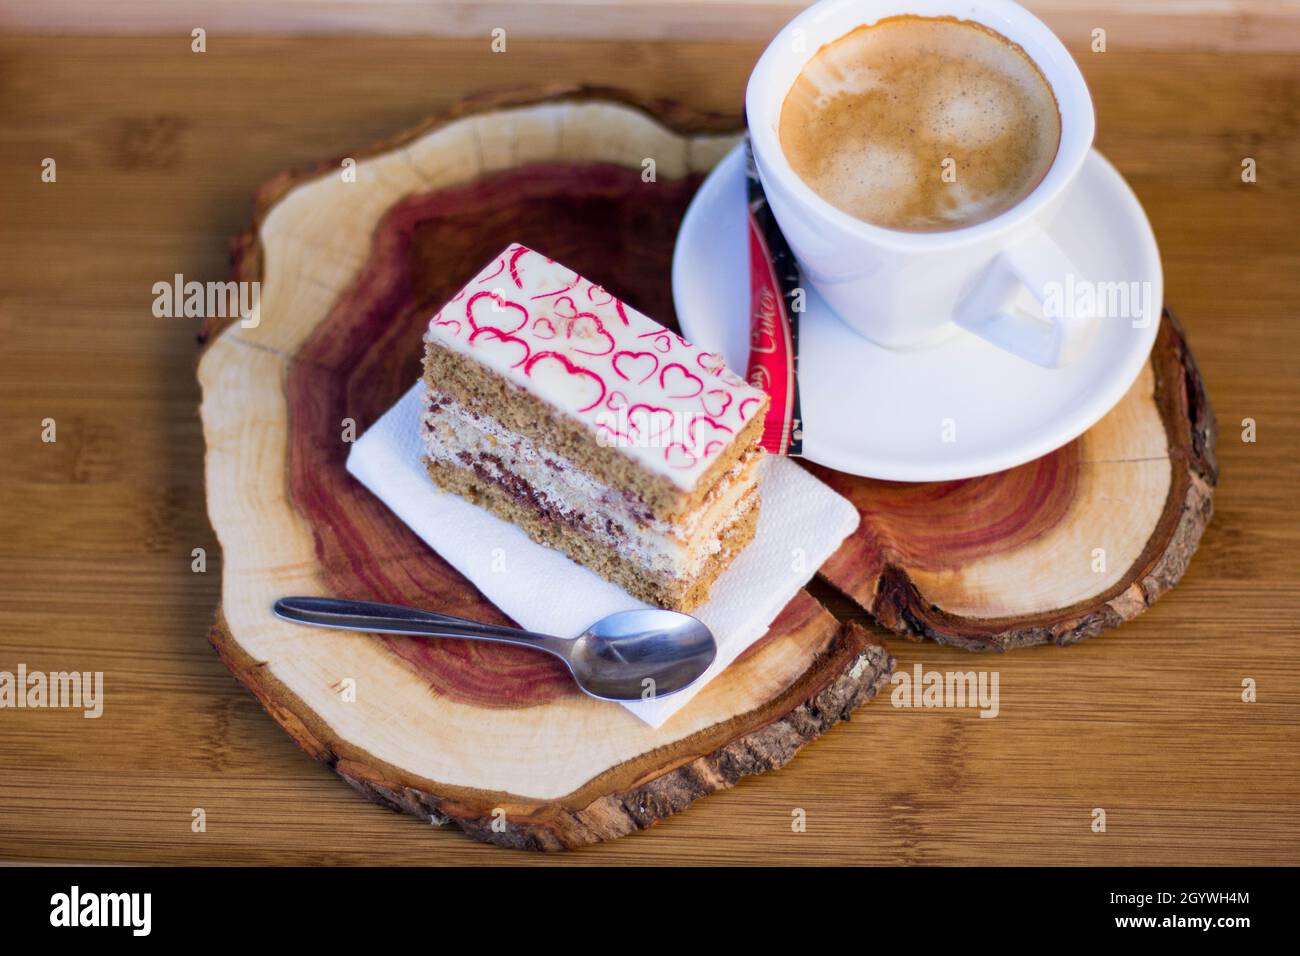 Tasty Slice of Cake with Cream Filling and Heart Decor on Top with Coffee on Cherry Board. Coffee Break Stock Photo